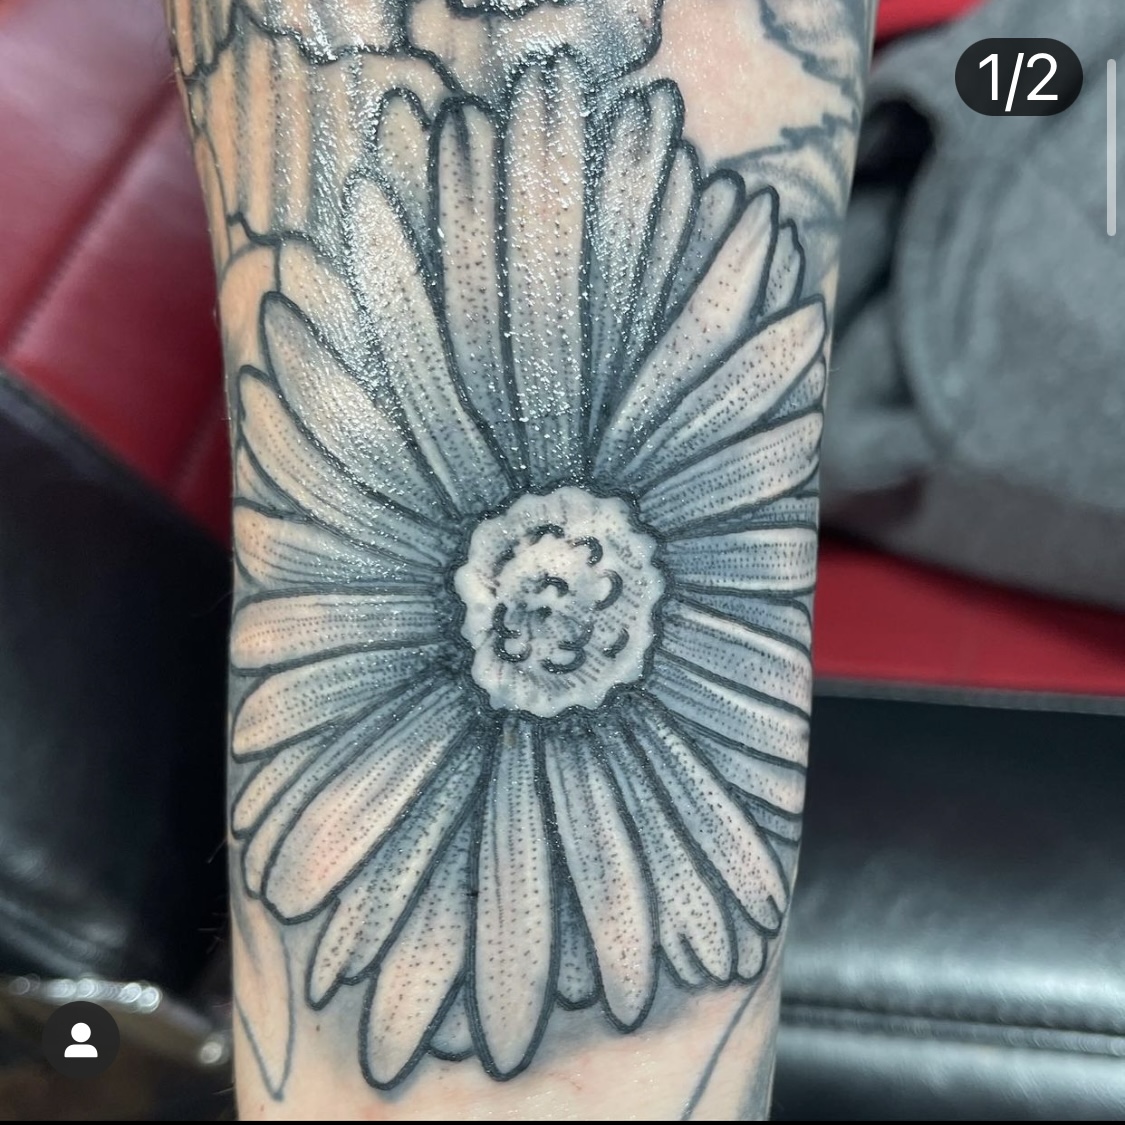 New tattoo of a flower from top tattoo artists in dallas